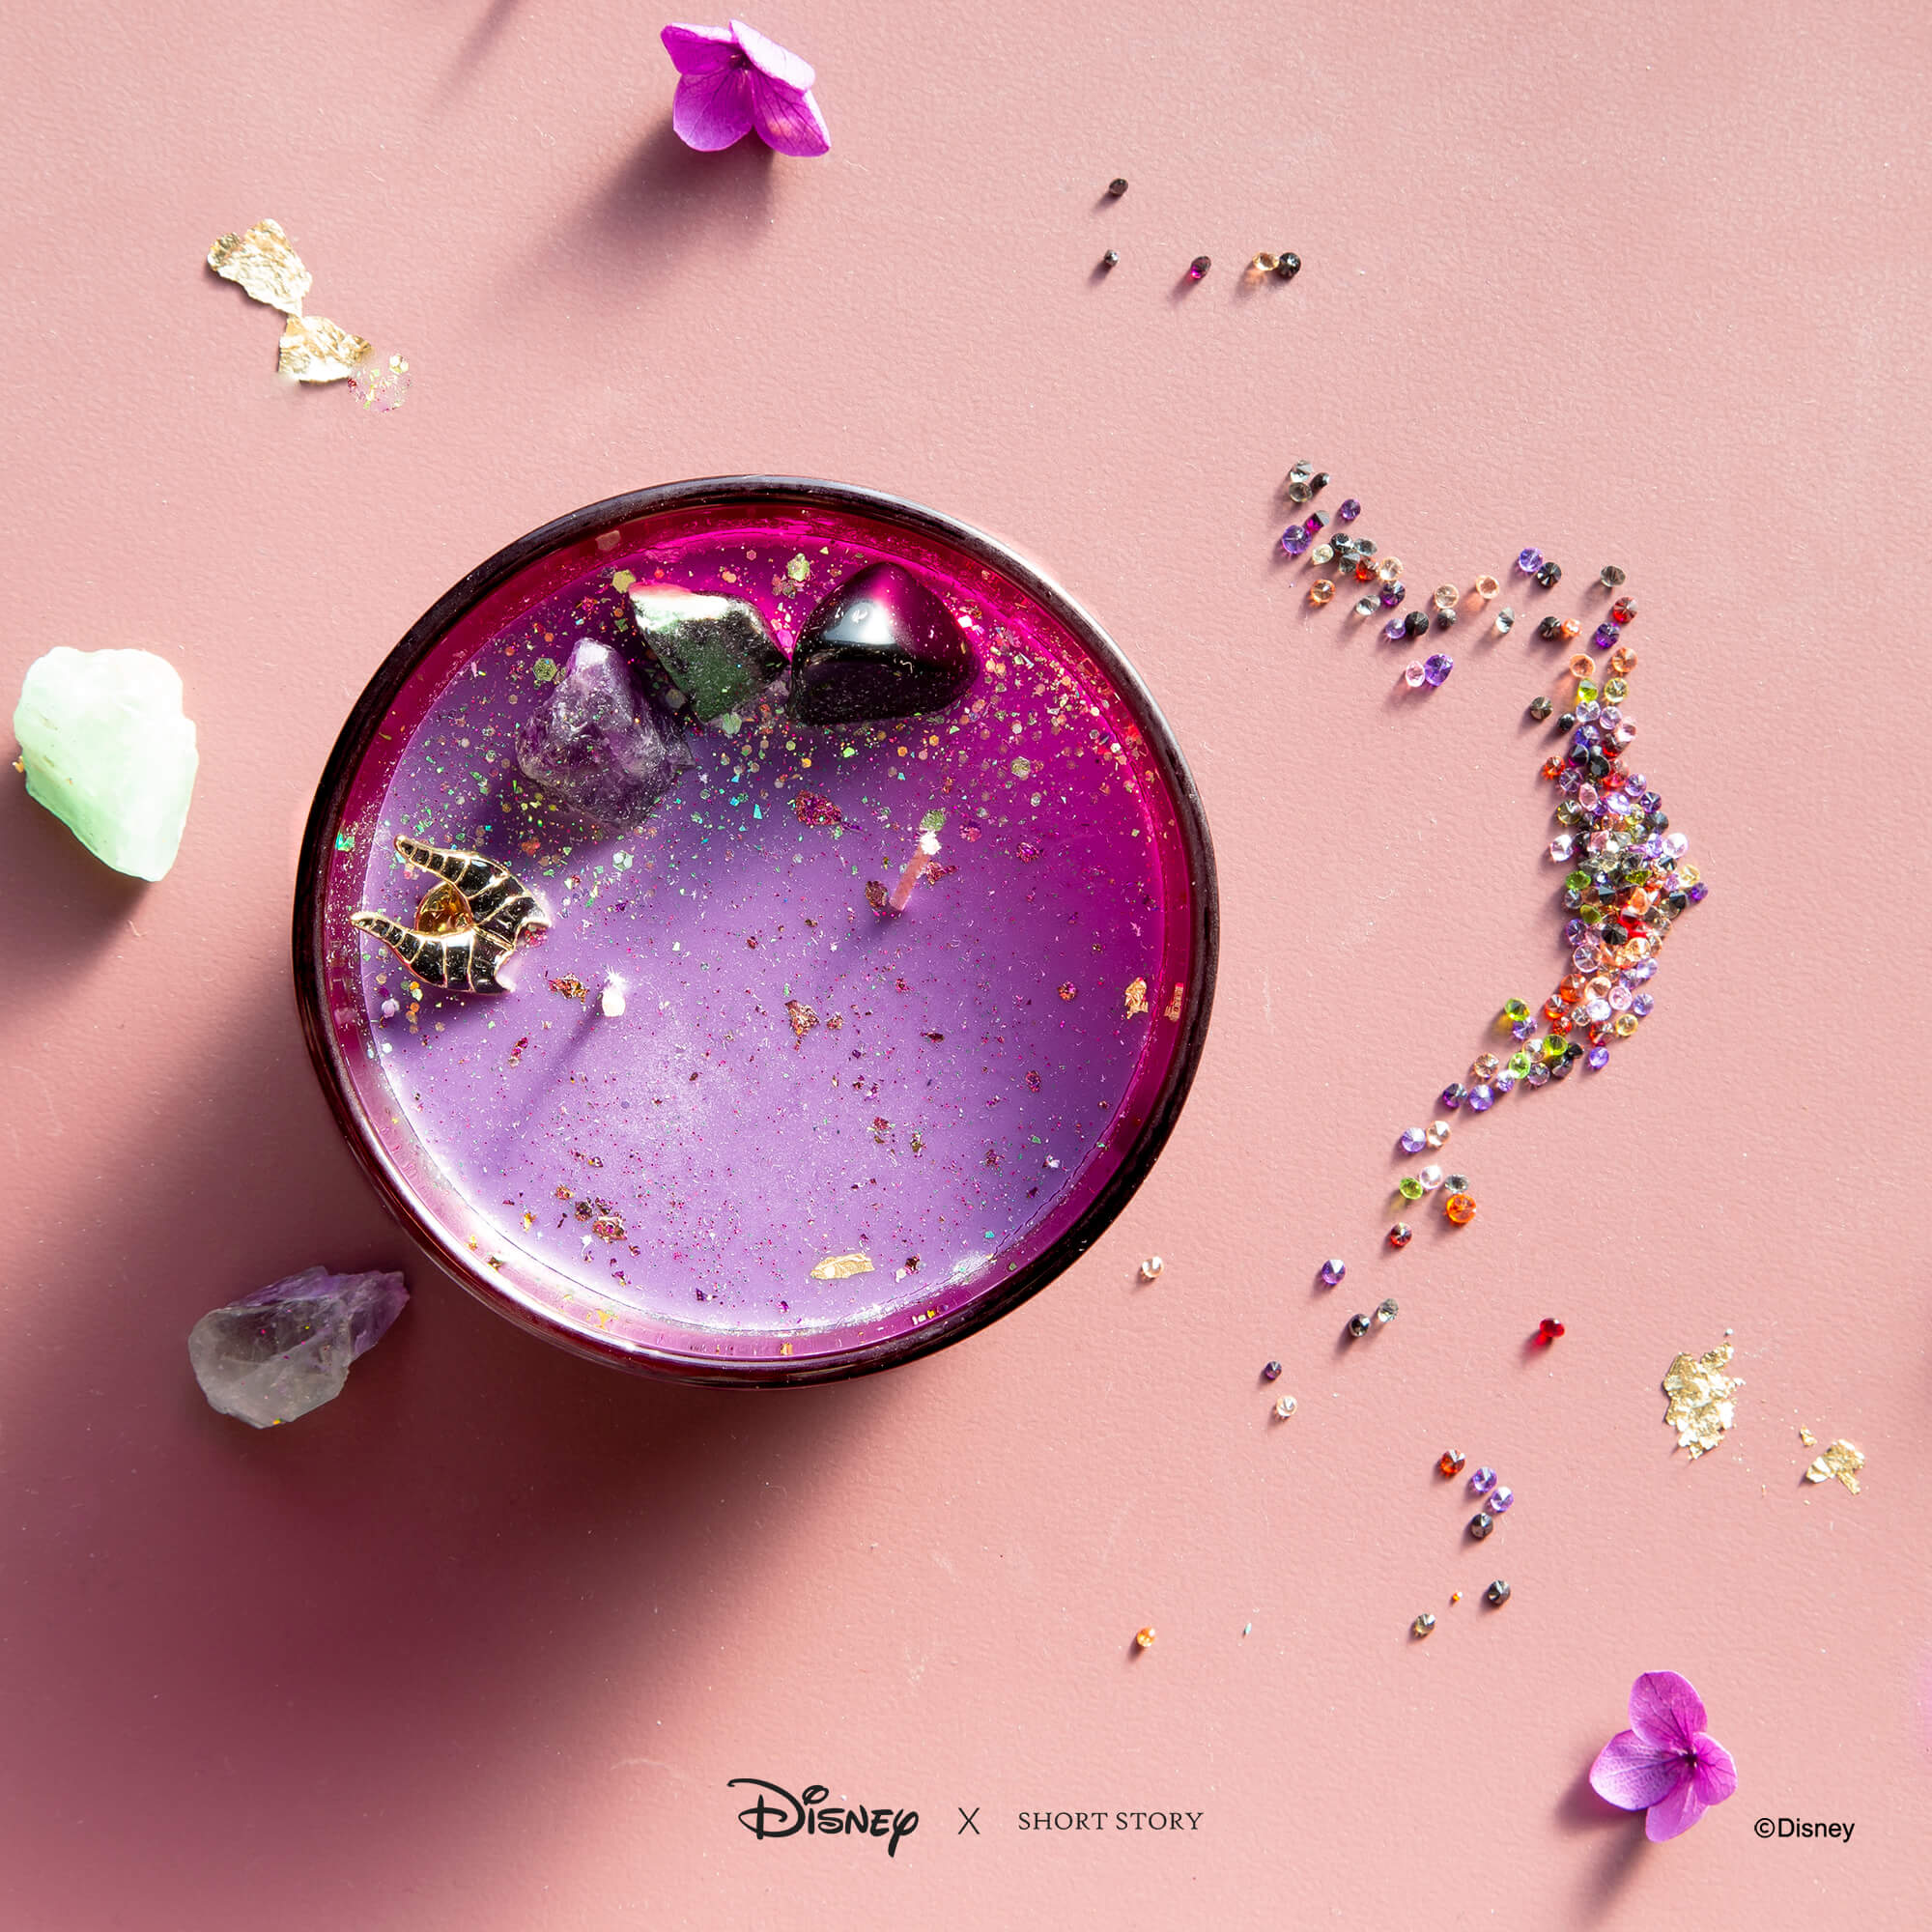 Disney Candle Maleficent